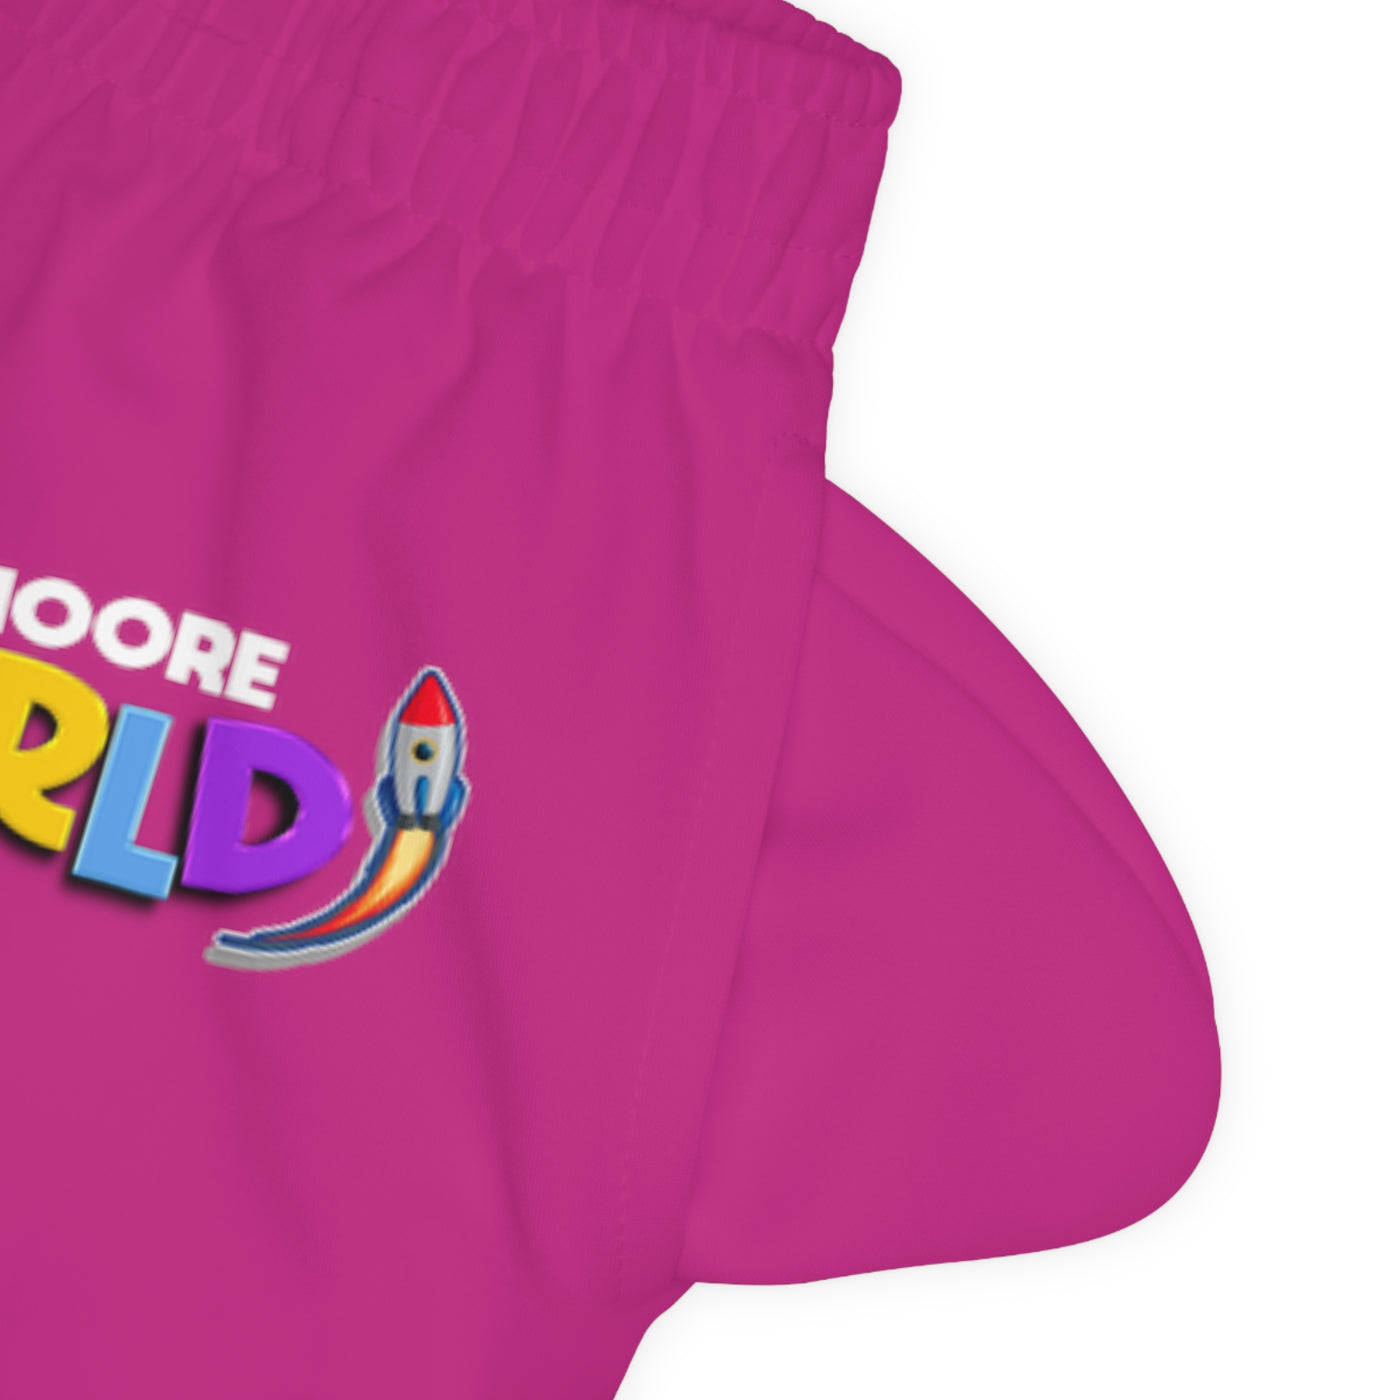 King Moore World Kids Joggers (Pink)